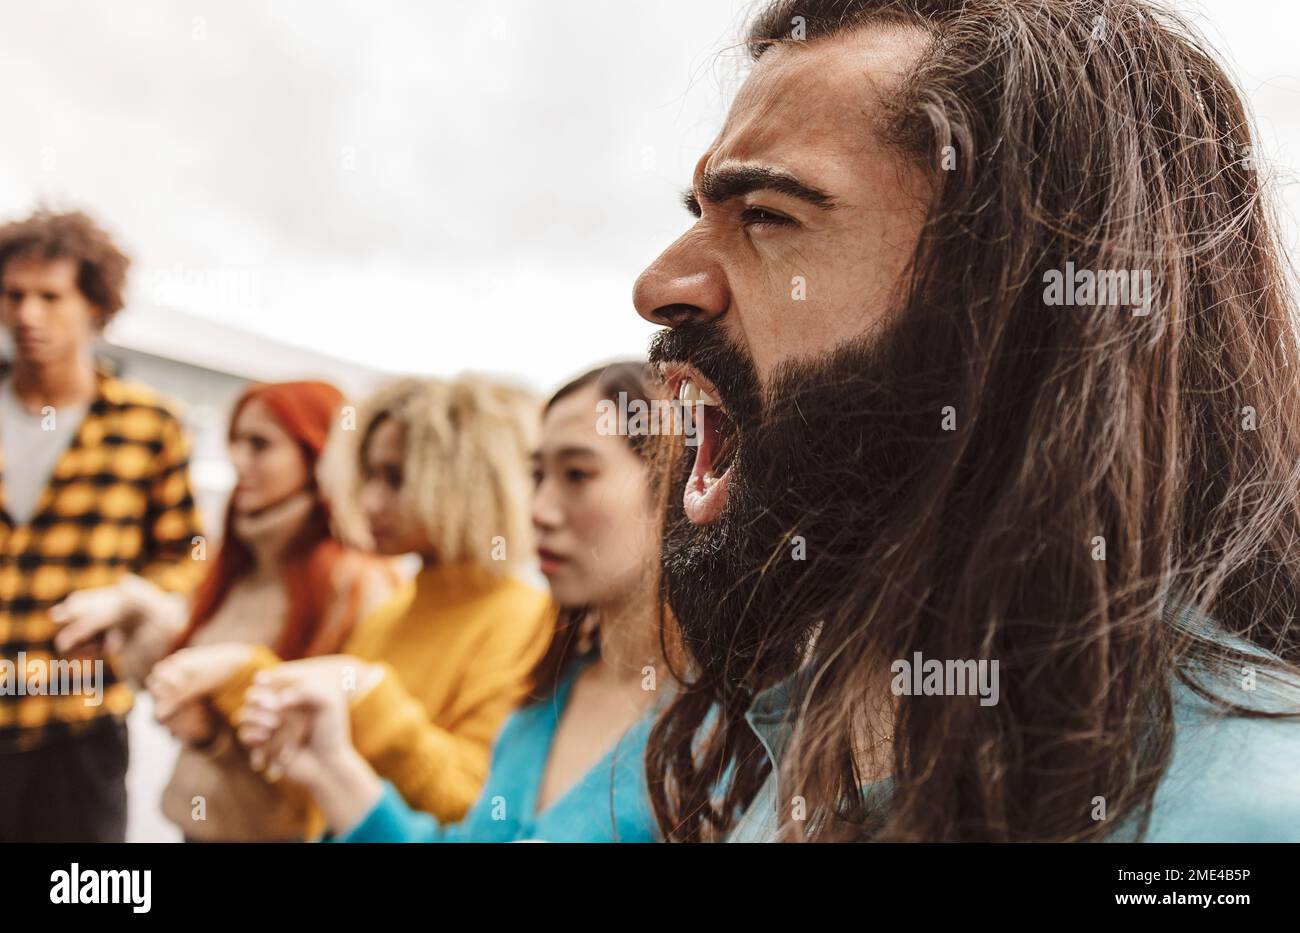 Rebellion hipster man screaming with activists at protest Stock Photo